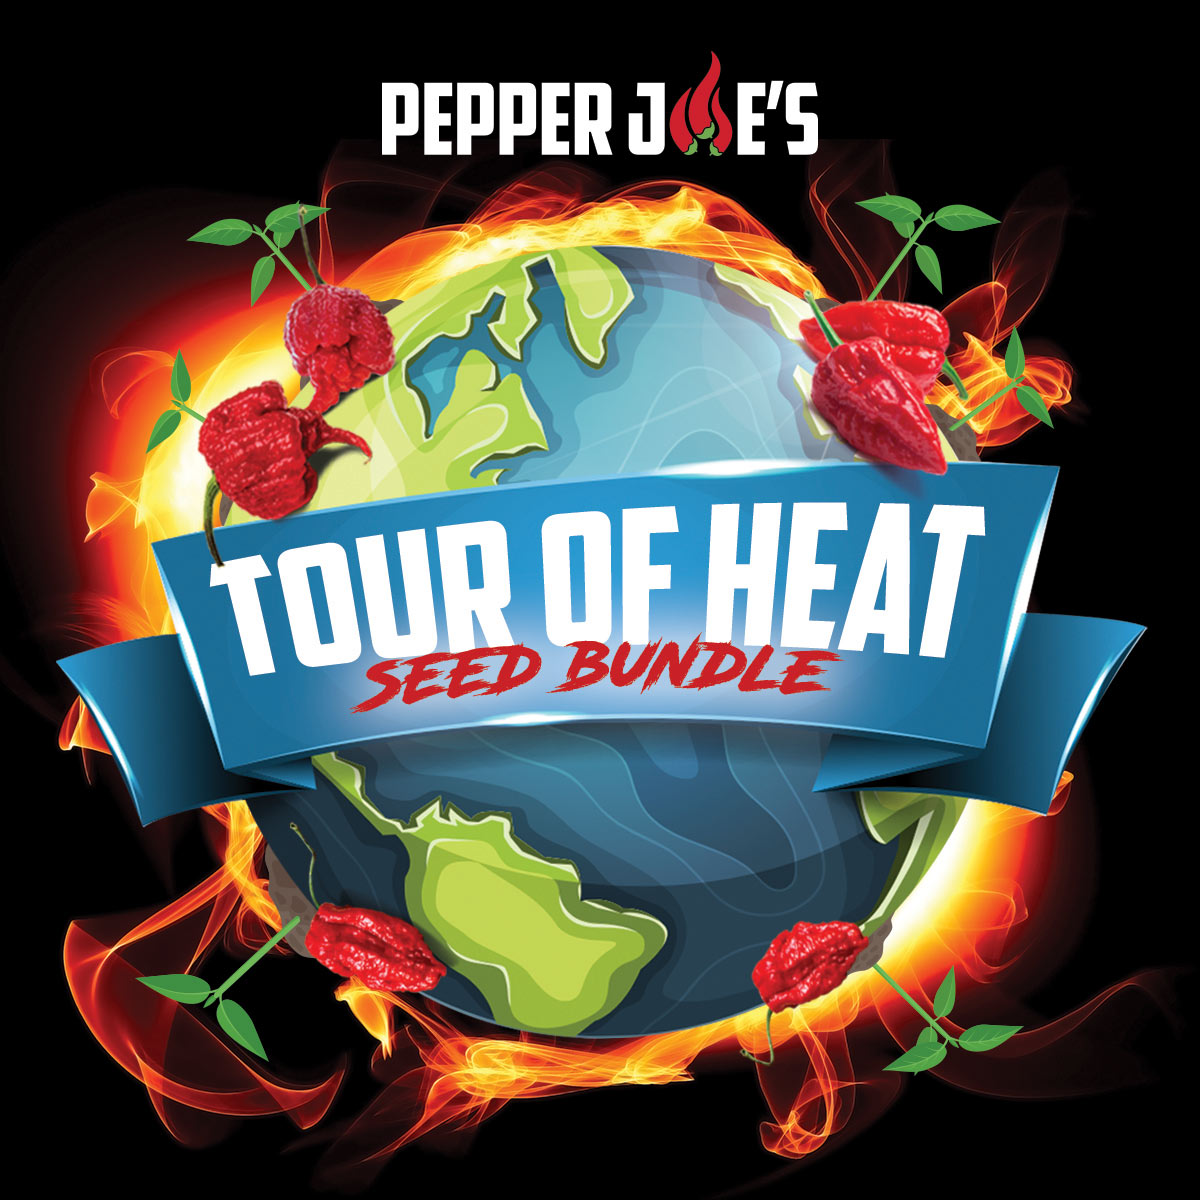 Tour of Heat SuperHot Seed Collection - hot pepper seed packs - Carolina Reaper, Ghost pepper, Apocalypse Scorpion pepper